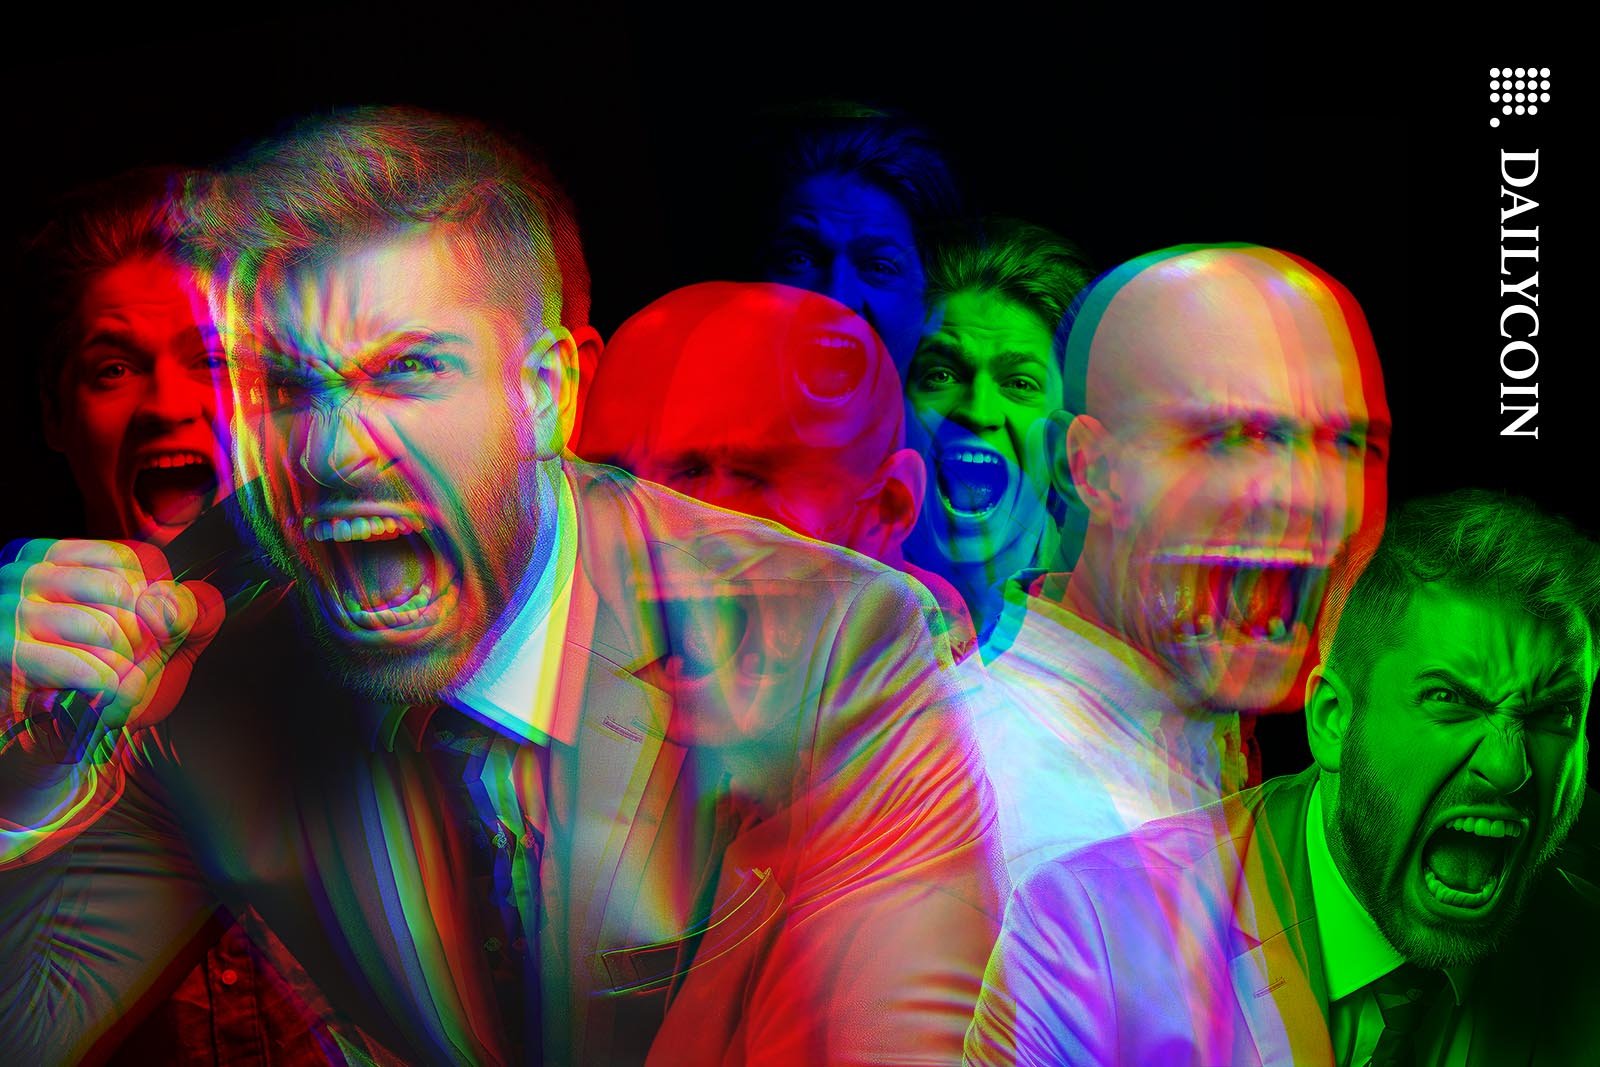 Many angry man shouting in an RGB split composition.